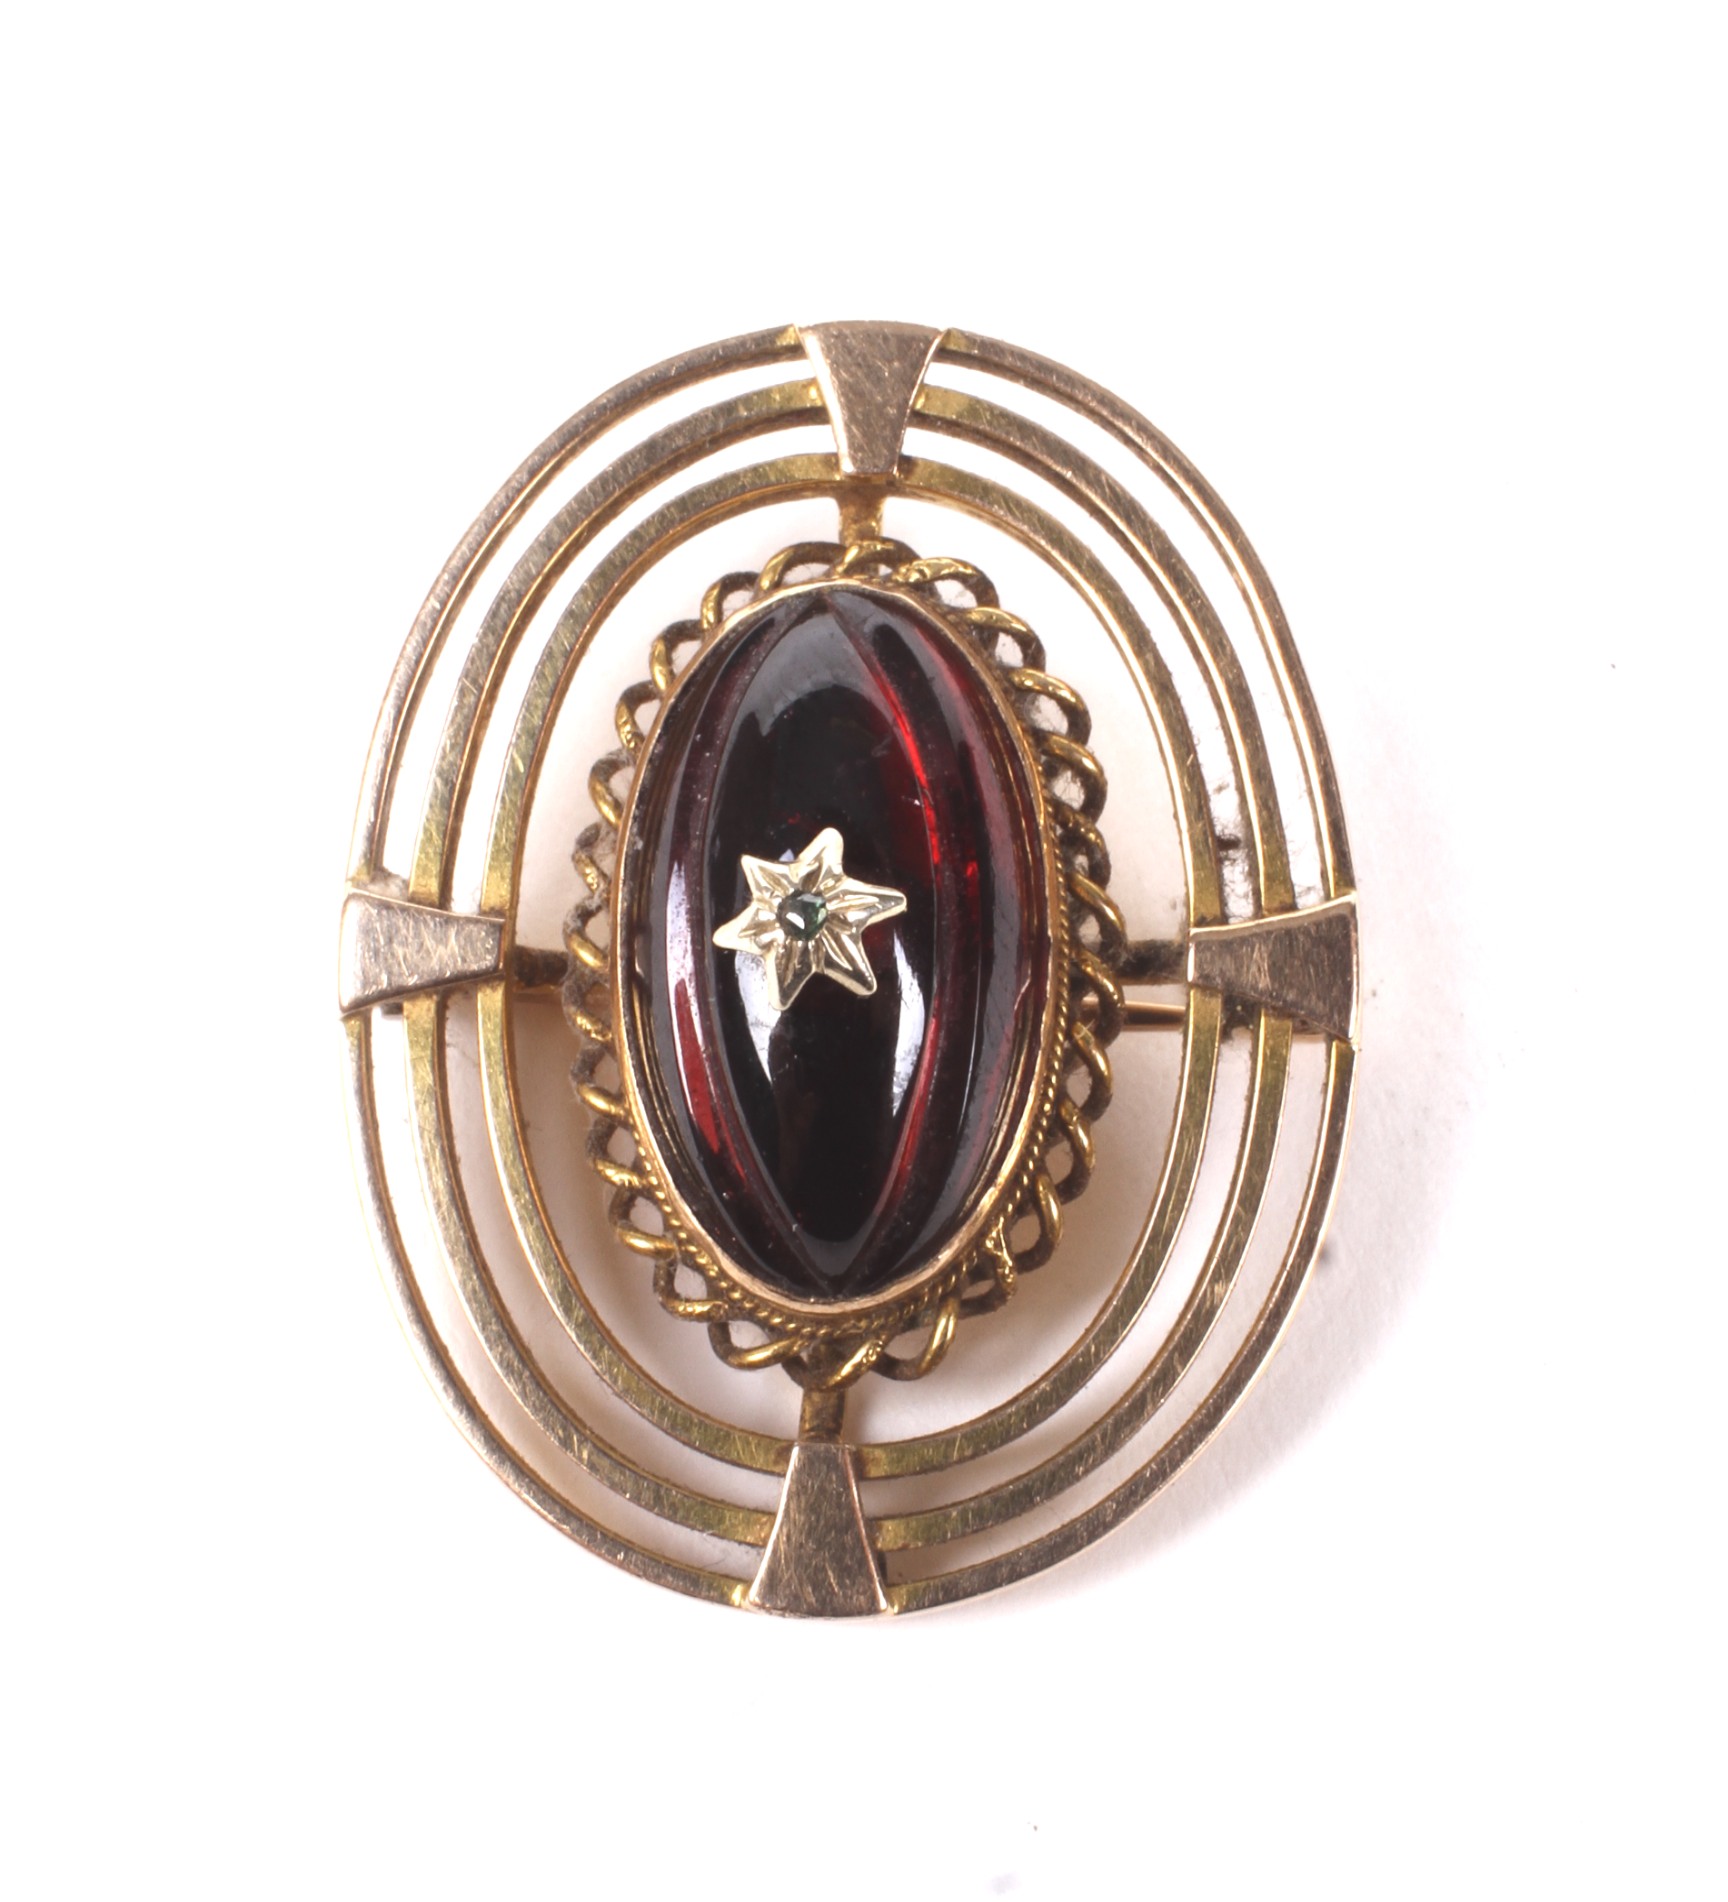 An early 20th century gold and garnet oval brooch.